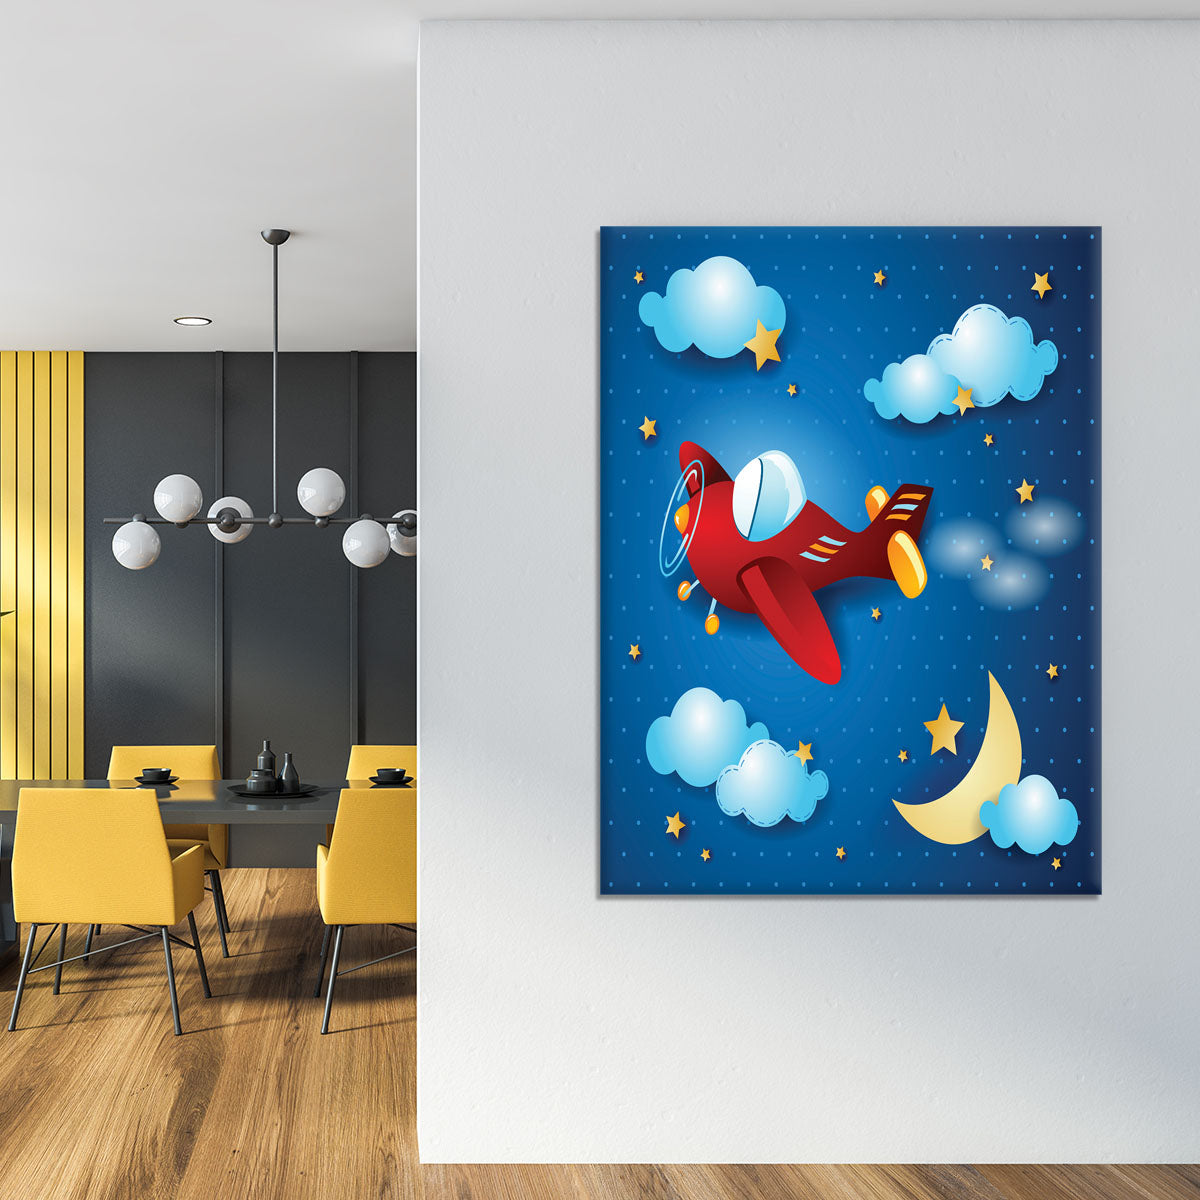 Retro airplane by night Canvas Print or Poster - Canvas Art Rocks - 4